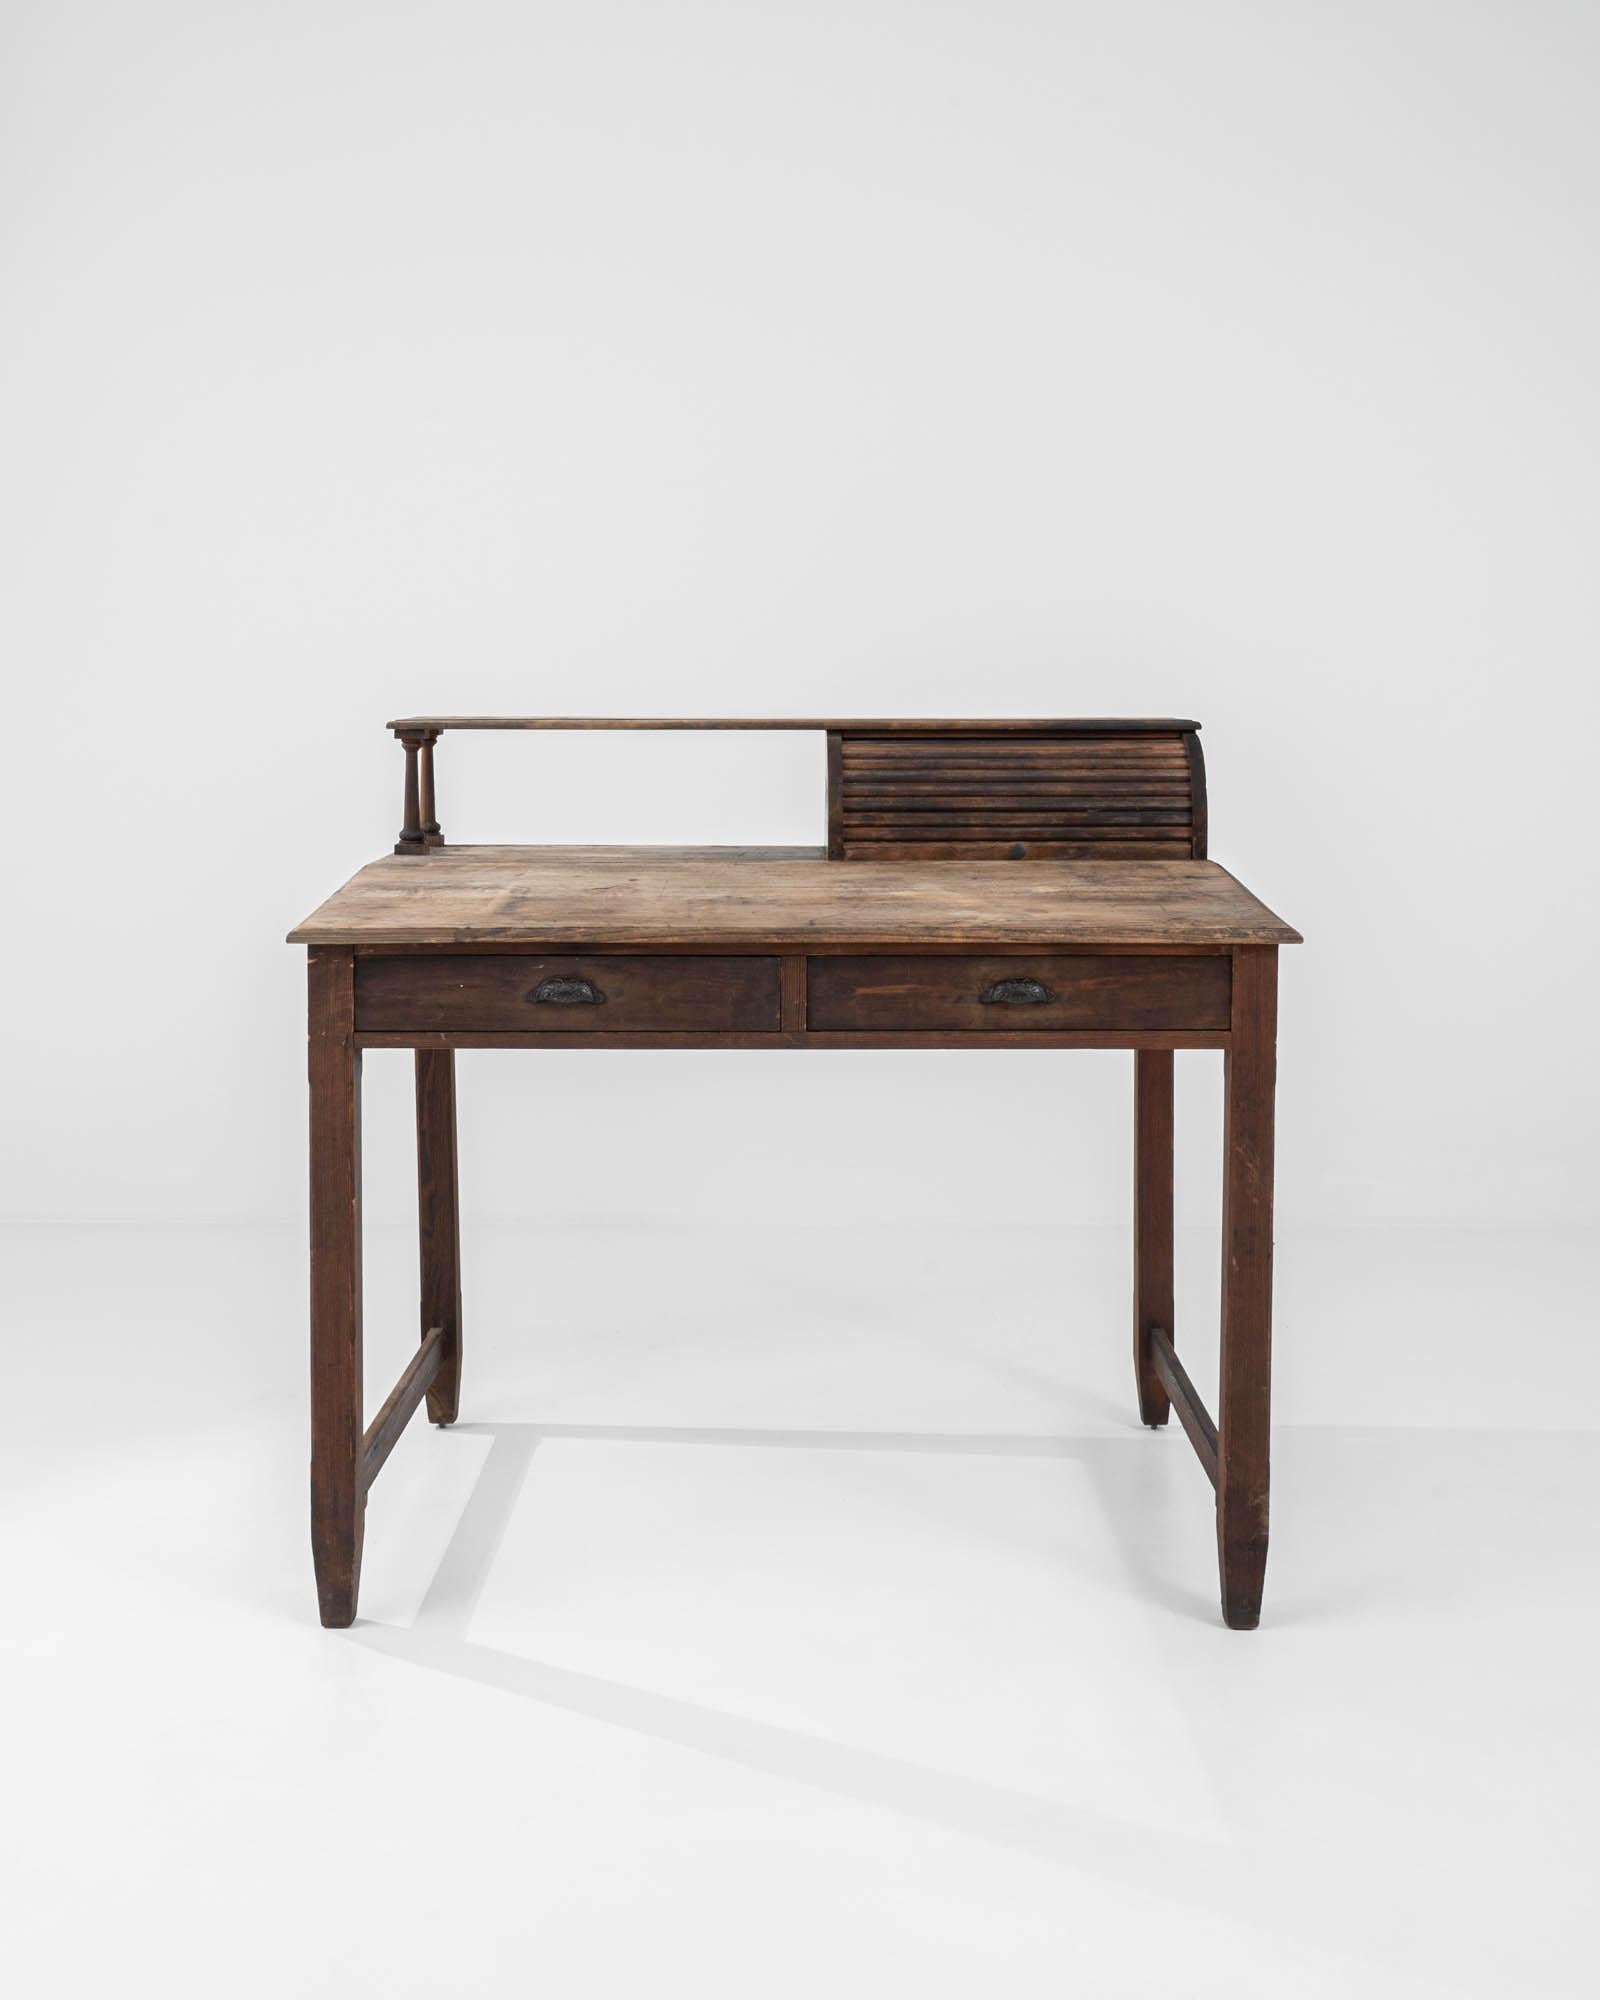 The unique design of this vintage wooden writing desk combines a distinguished character with charming eccentricity. Built in France at the turn of the century, the broad tabletop is set at a slight angle, encouraging a comfortable working position.